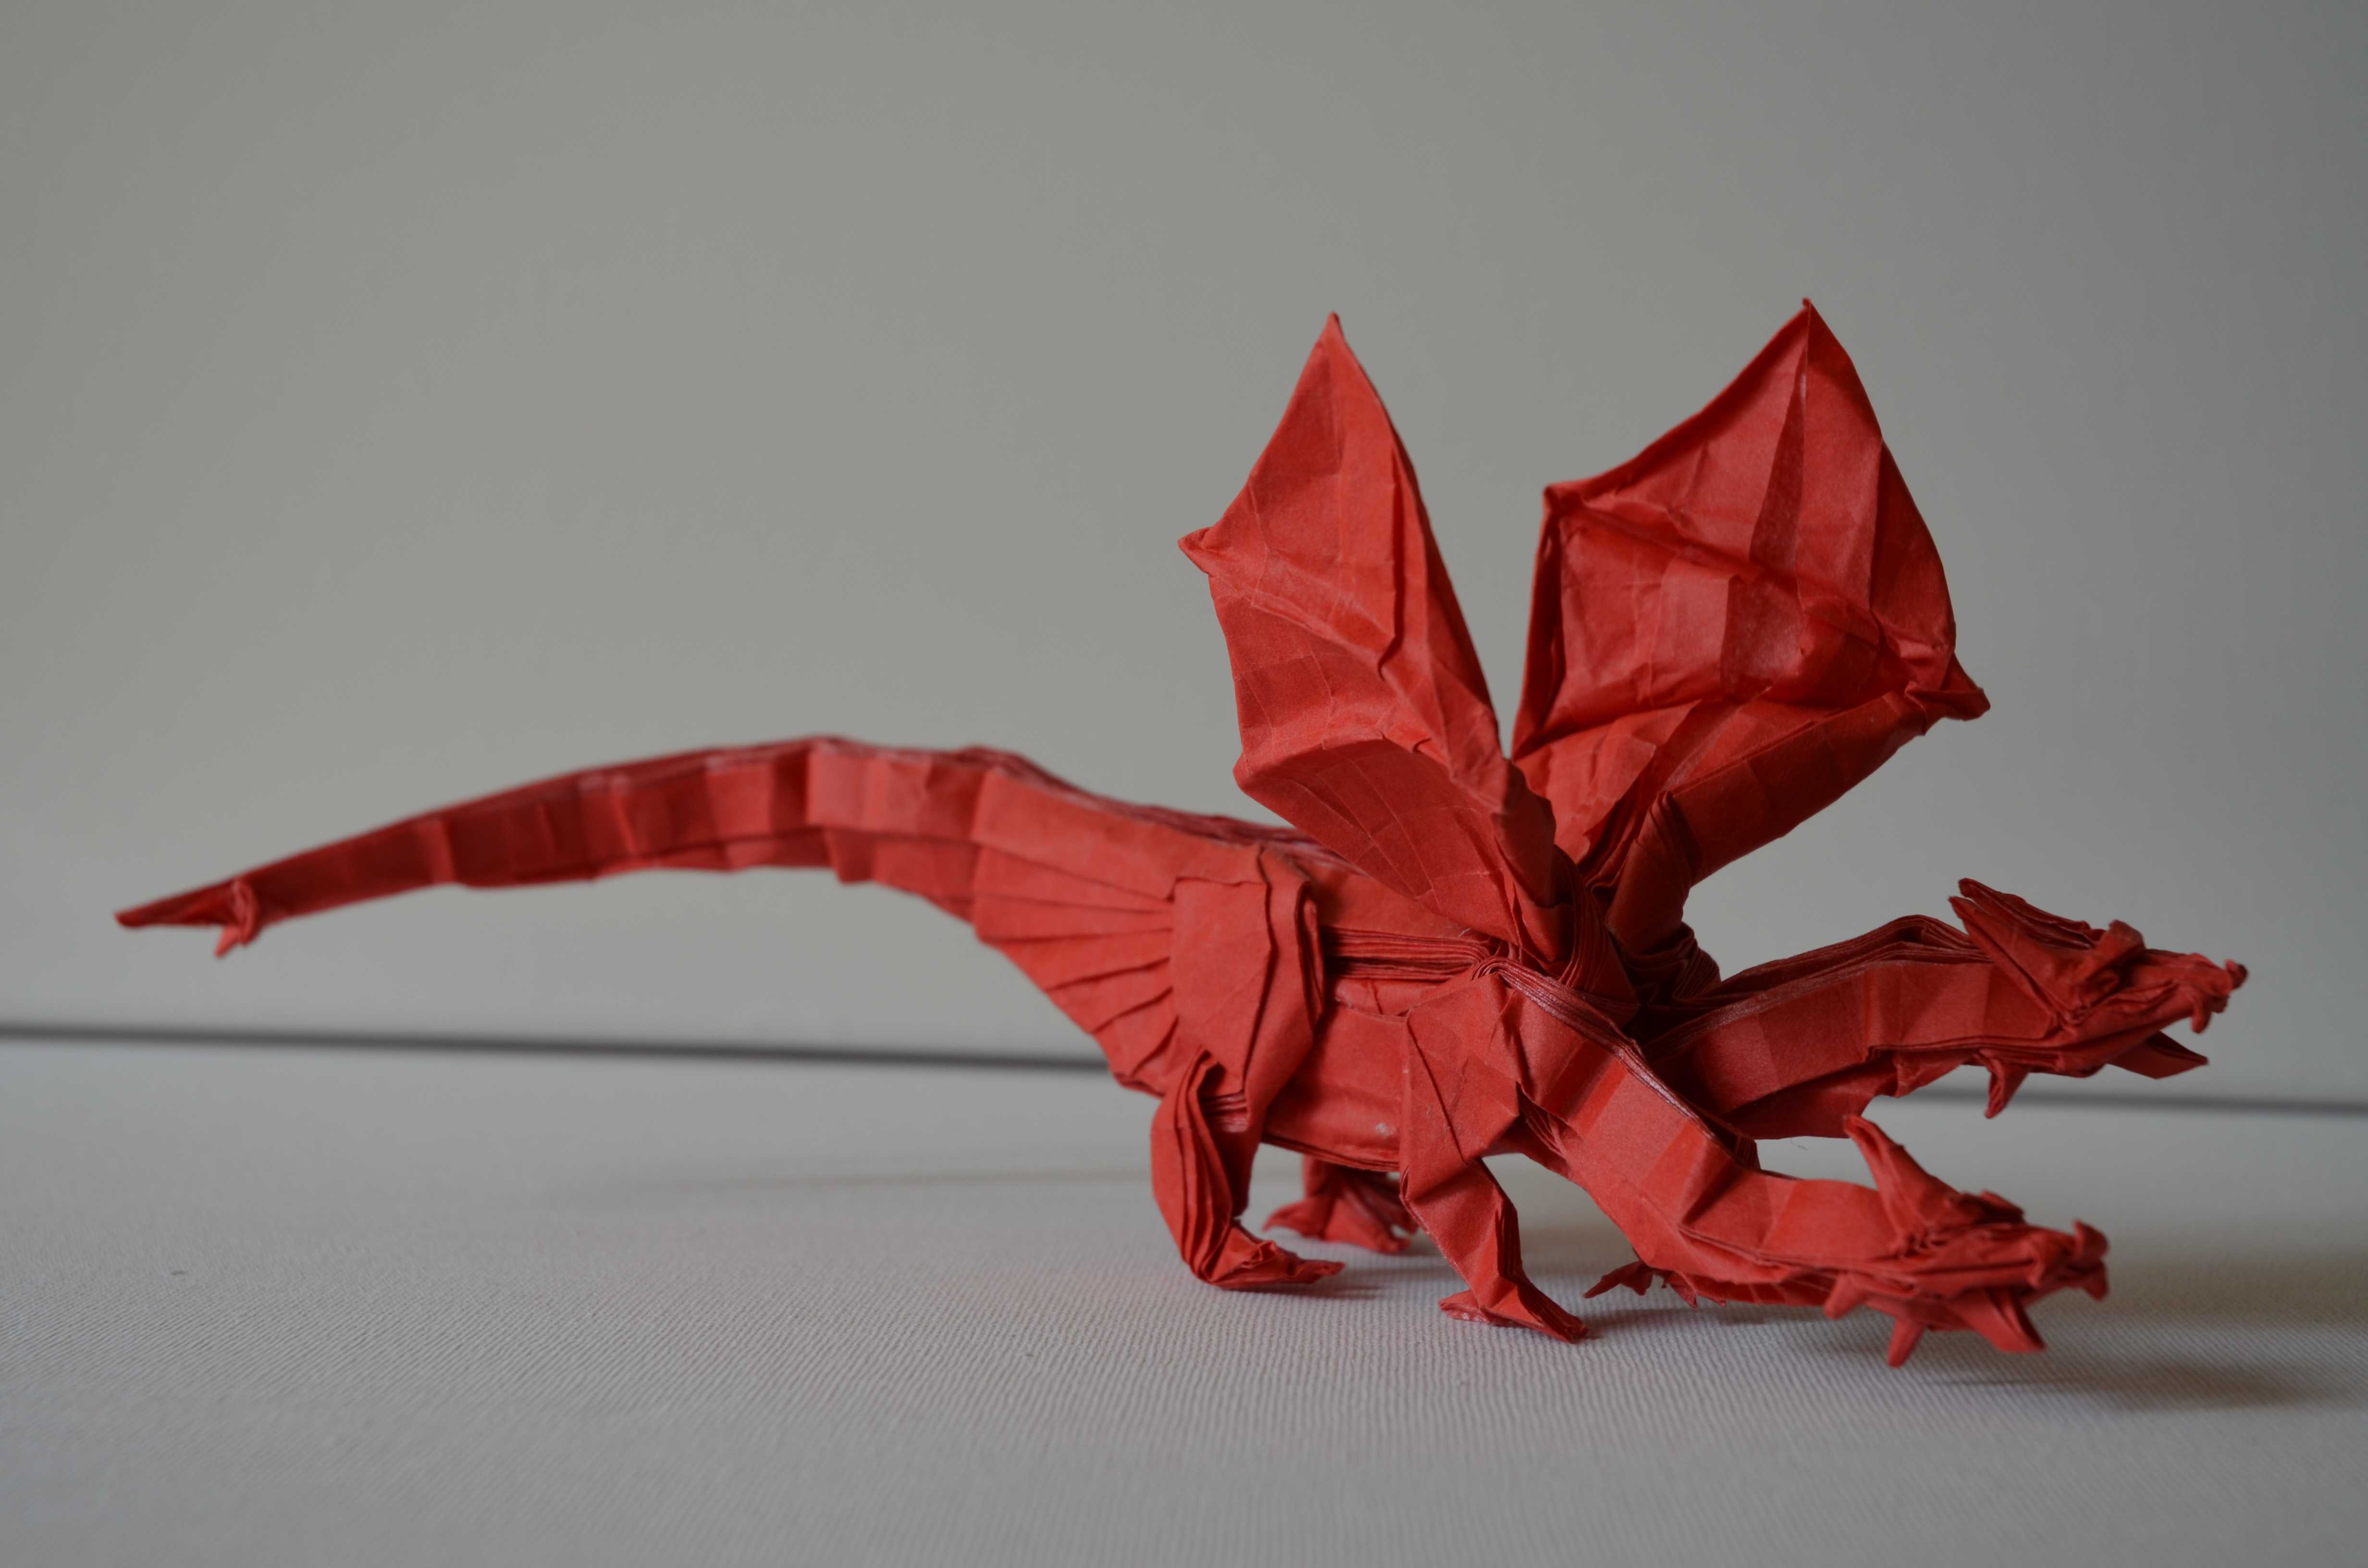 Learn about origami for National Origami Day